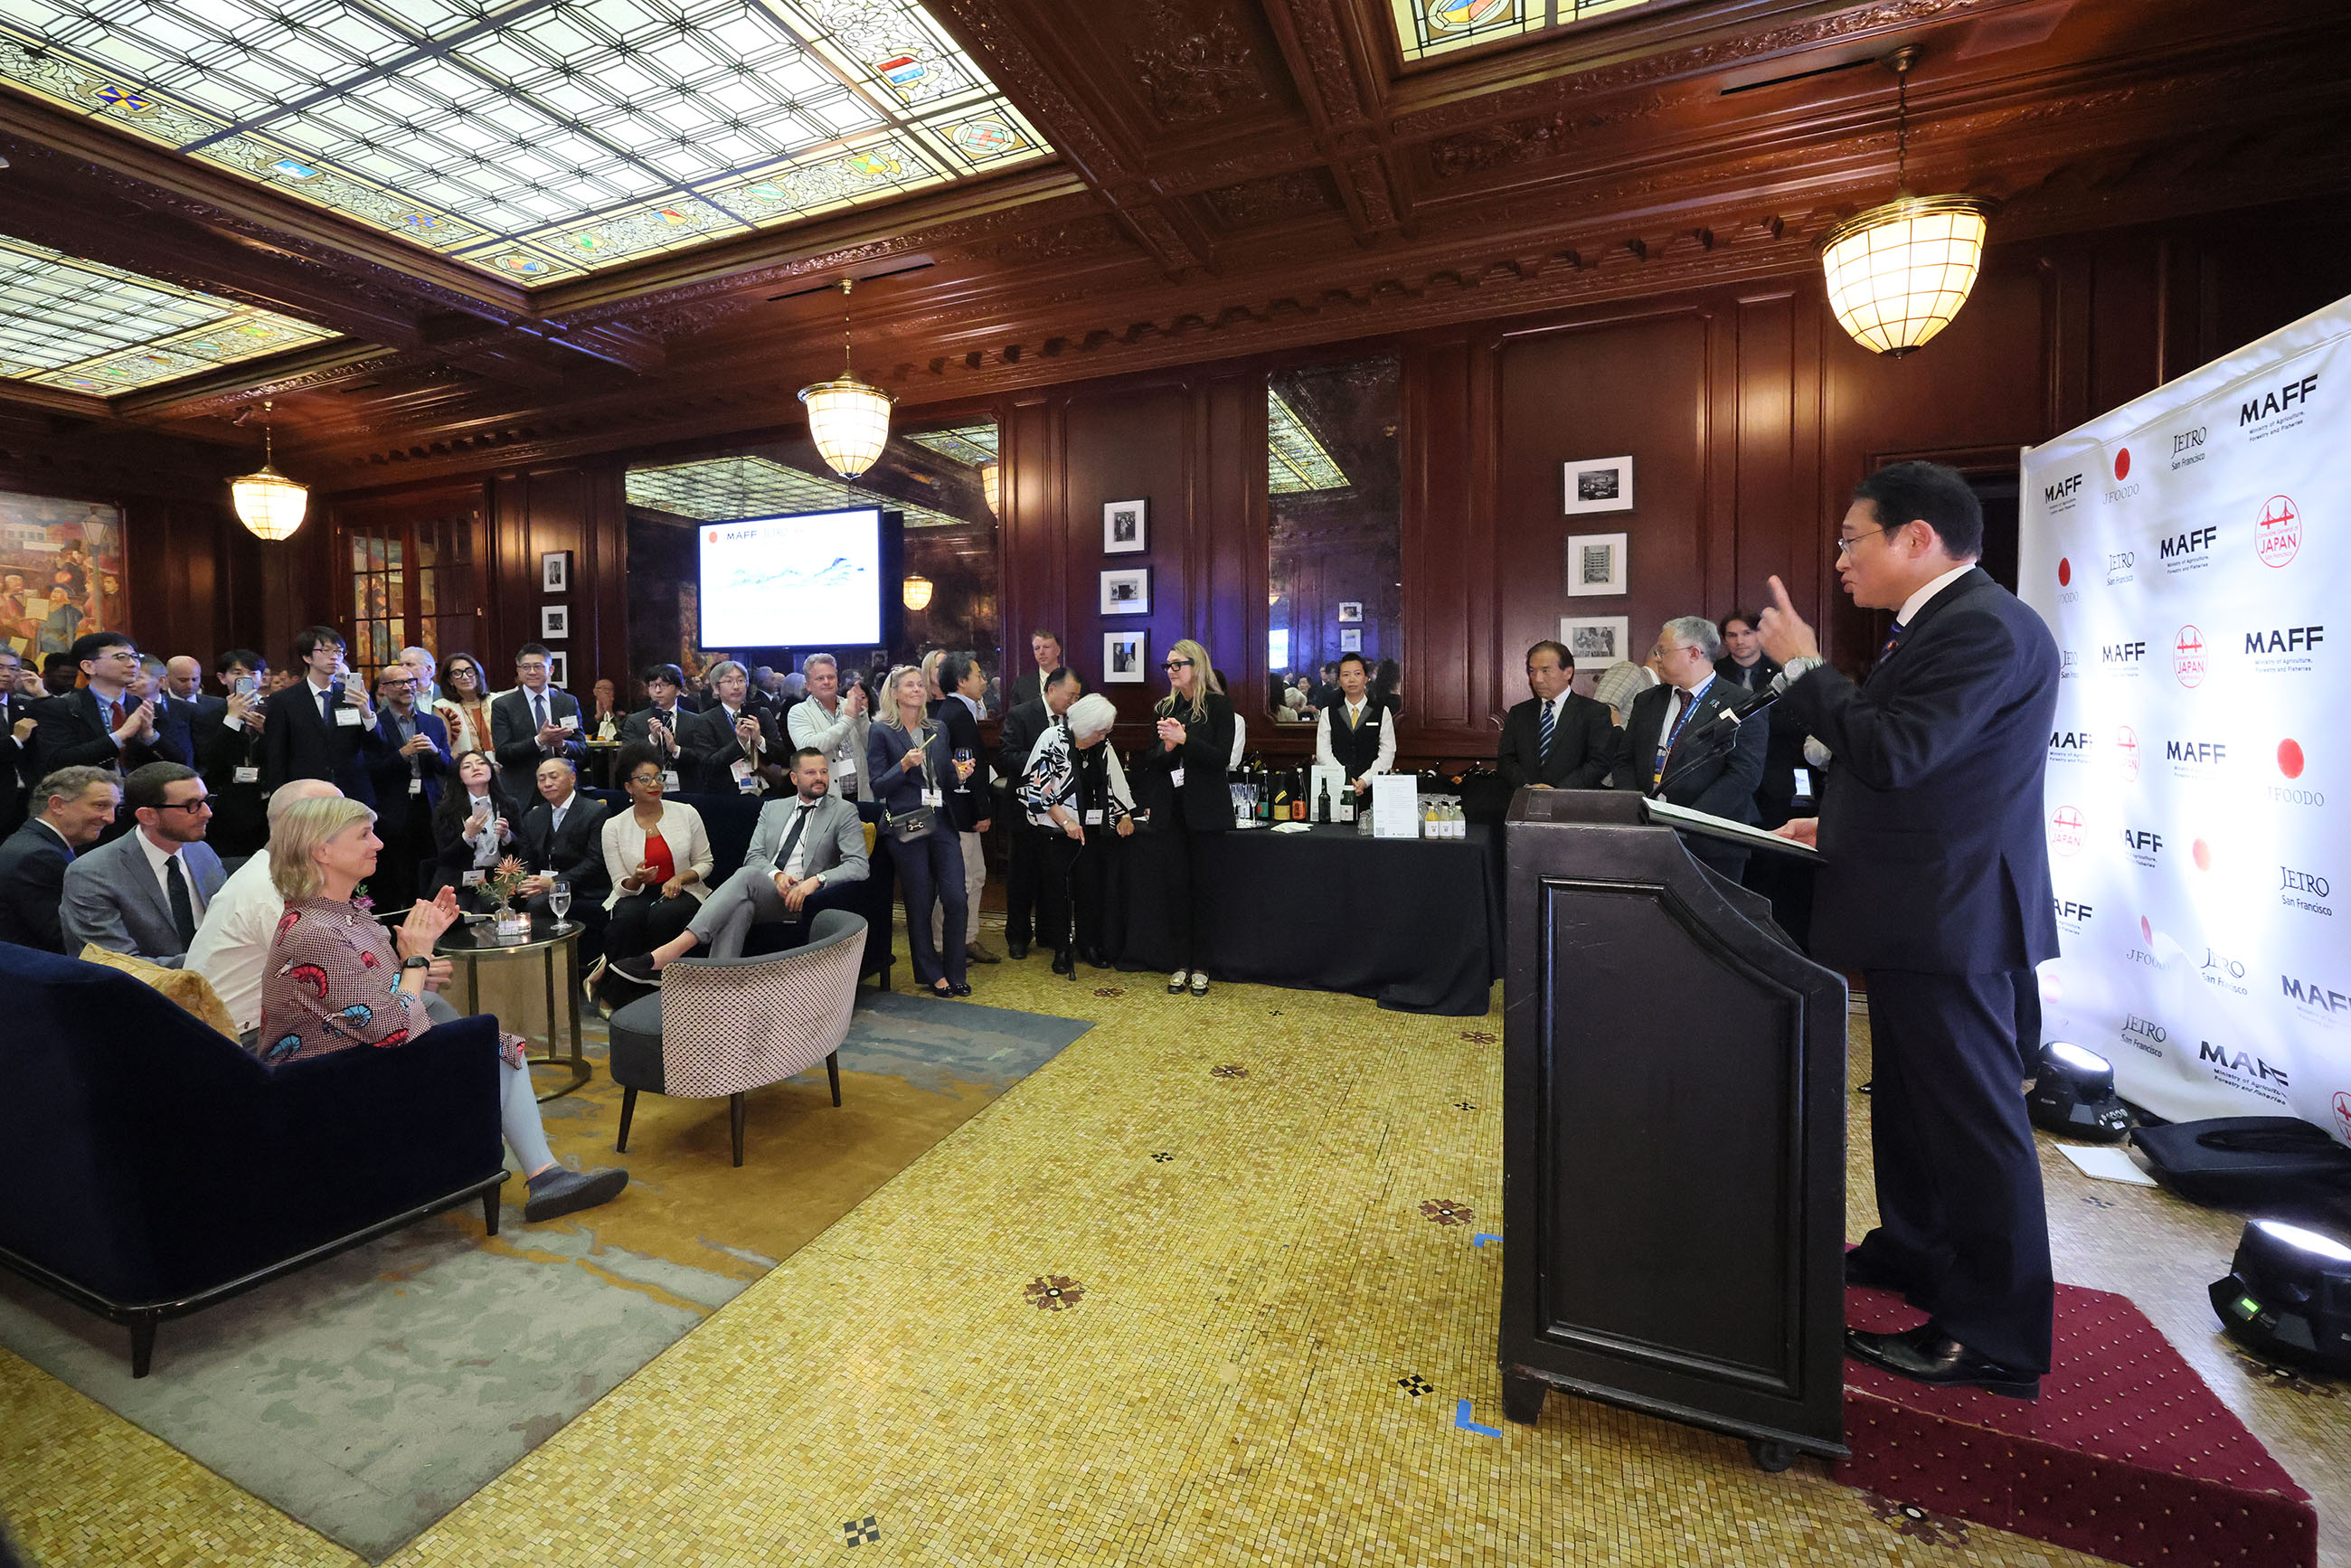 Prime Minister Kishida attending an event to promote Japanese marine products (1)